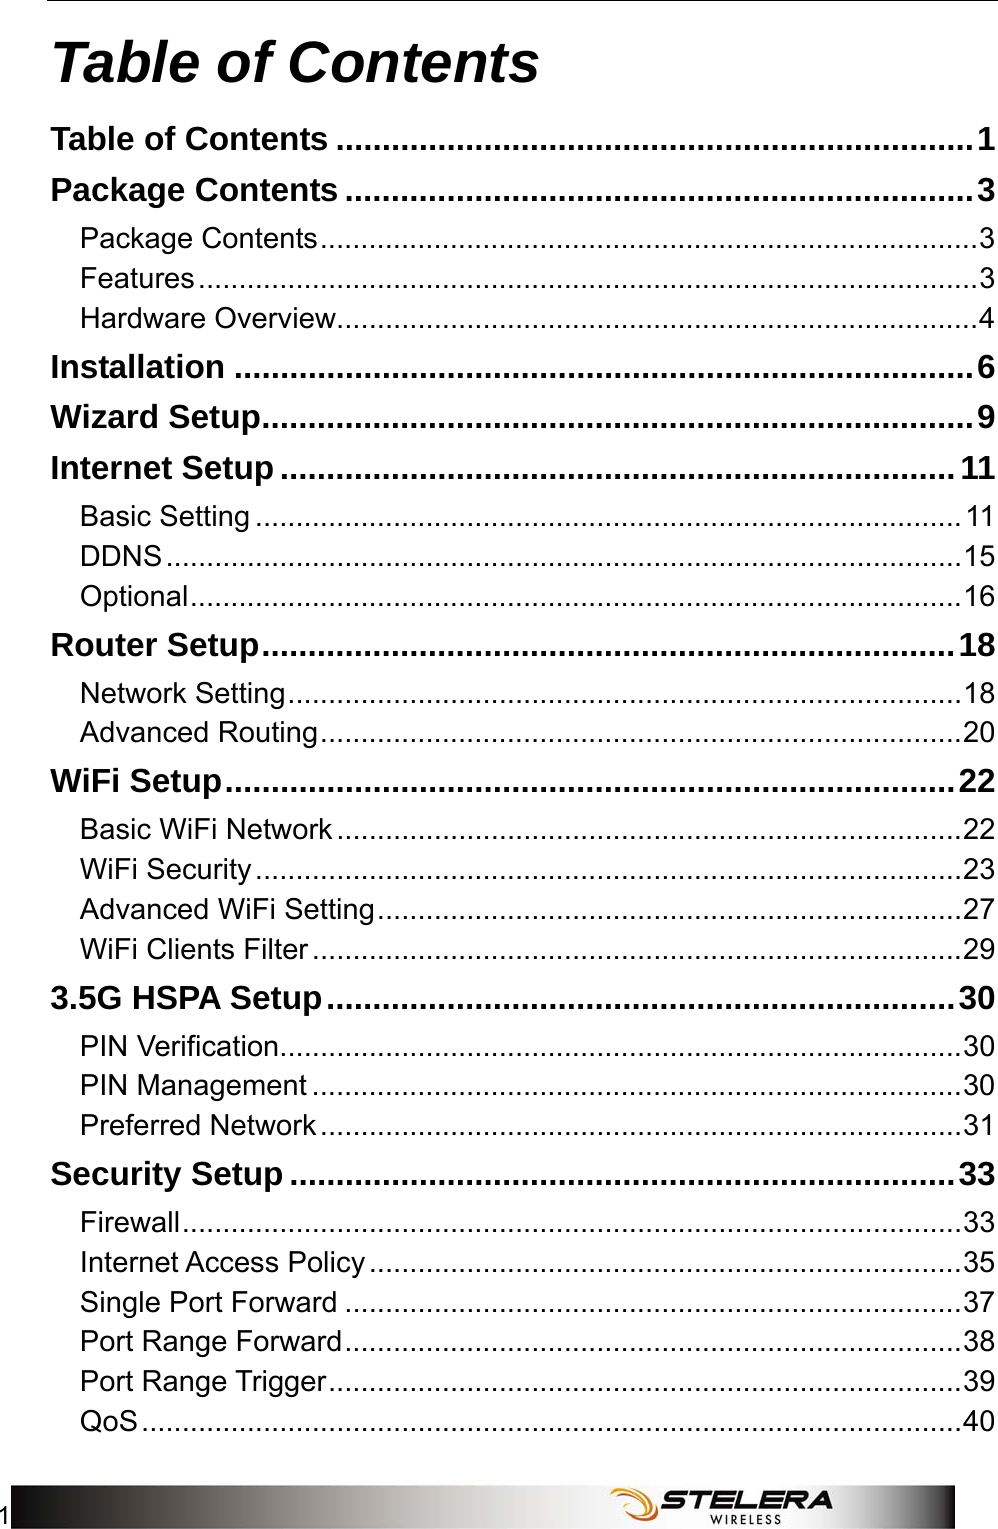   Table of Contents 1 Table of Contents Table of Contents .....................................................................1 Package Contents ....................................................................3 Package Contents.................................................................................3 Features................................................................................................3 Hardware Overview...............................................................................4 Installation ................................................................................6 Wizard Setup.............................................................................9 Internet Setup .........................................................................11 Basic Setting .......................................................................................11 DDNS..................................................................................................15 Optional...............................................................................................16 Router Setup...........................................................................18 Network Setting...................................................................................18 Advanced Routing...............................................................................20 WiFi Setup...............................................................................22 Basic WiFi Network.............................................................................22 WiFi Security.......................................................................................23 Advanced WiFi Setting........................................................................27 WiFi Clients Filter................................................................................29 3.5G HSPA Setup....................................................................30 PIN Verification....................................................................................30 PIN Management ................................................................................30 Preferred Network...............................................................................31 Security Setup ........................................................................33 Firewall................................................................................................33 Internet Access Policy.........................................................................35 Single Port Forward ............................................................................37 Port Range Forward............................................................................38 Port Range Trigger..............................................................................39 QoS.....................................................................................................40 